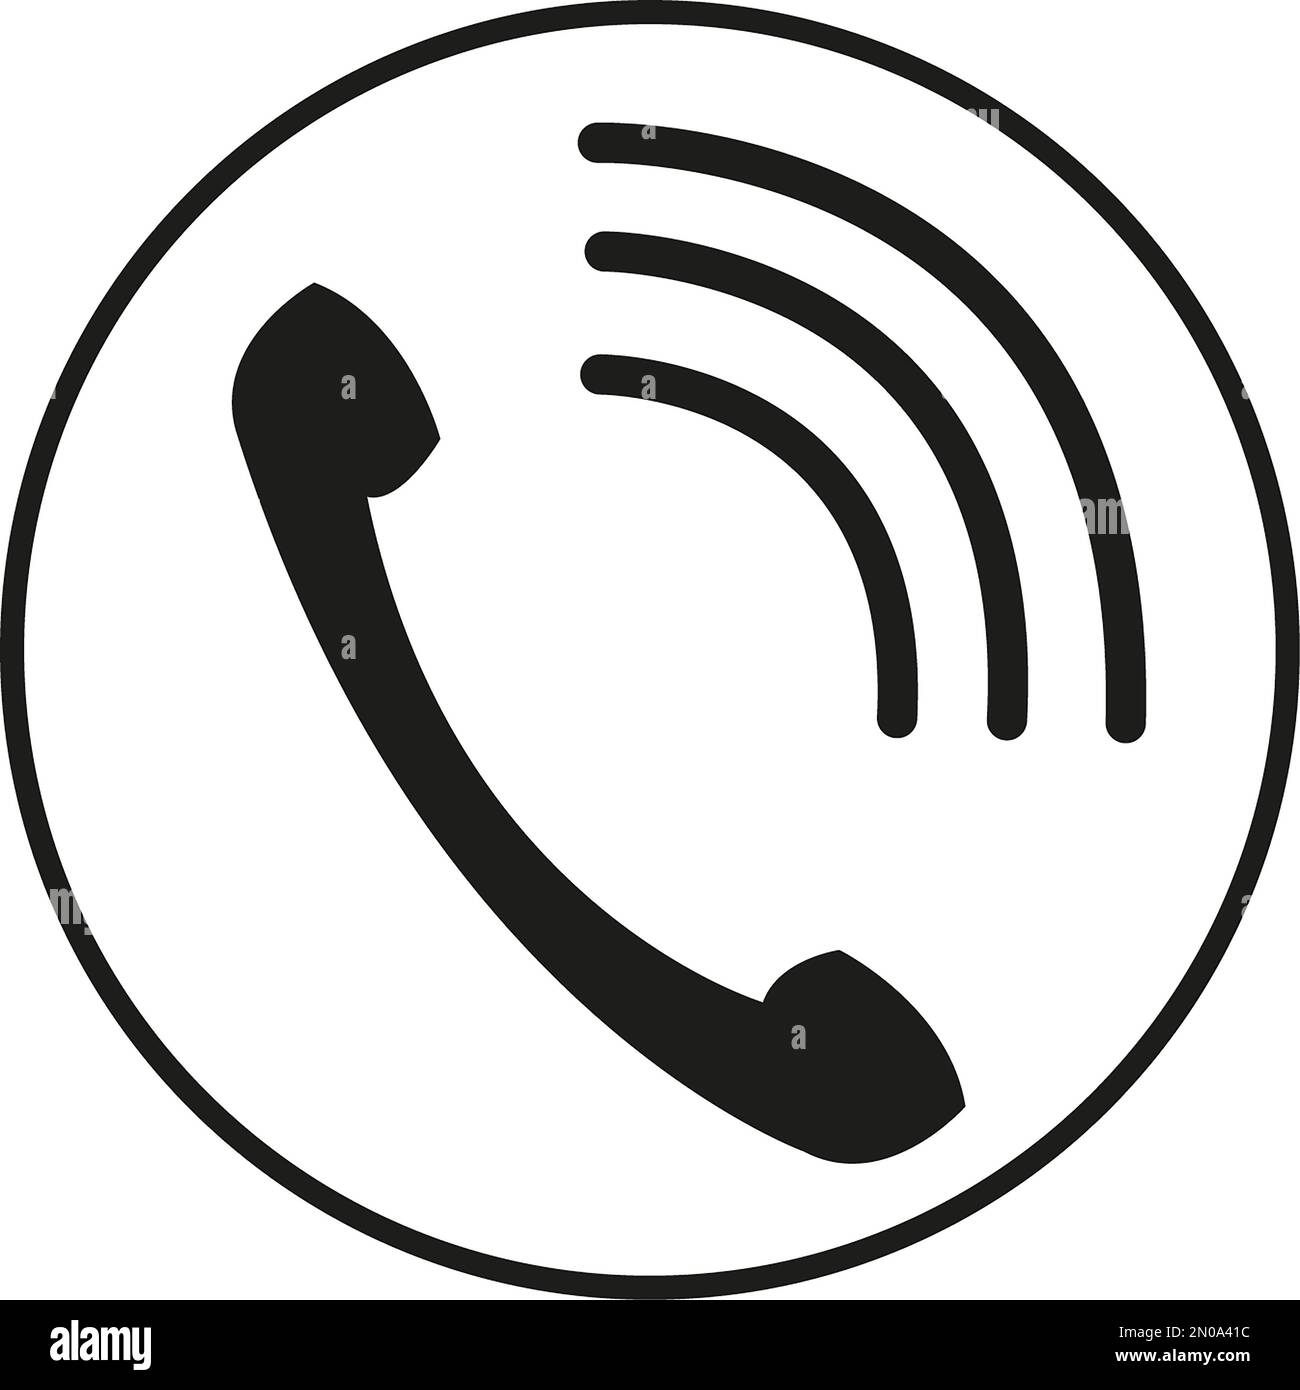 Round sign showing telephone call Stock Photo